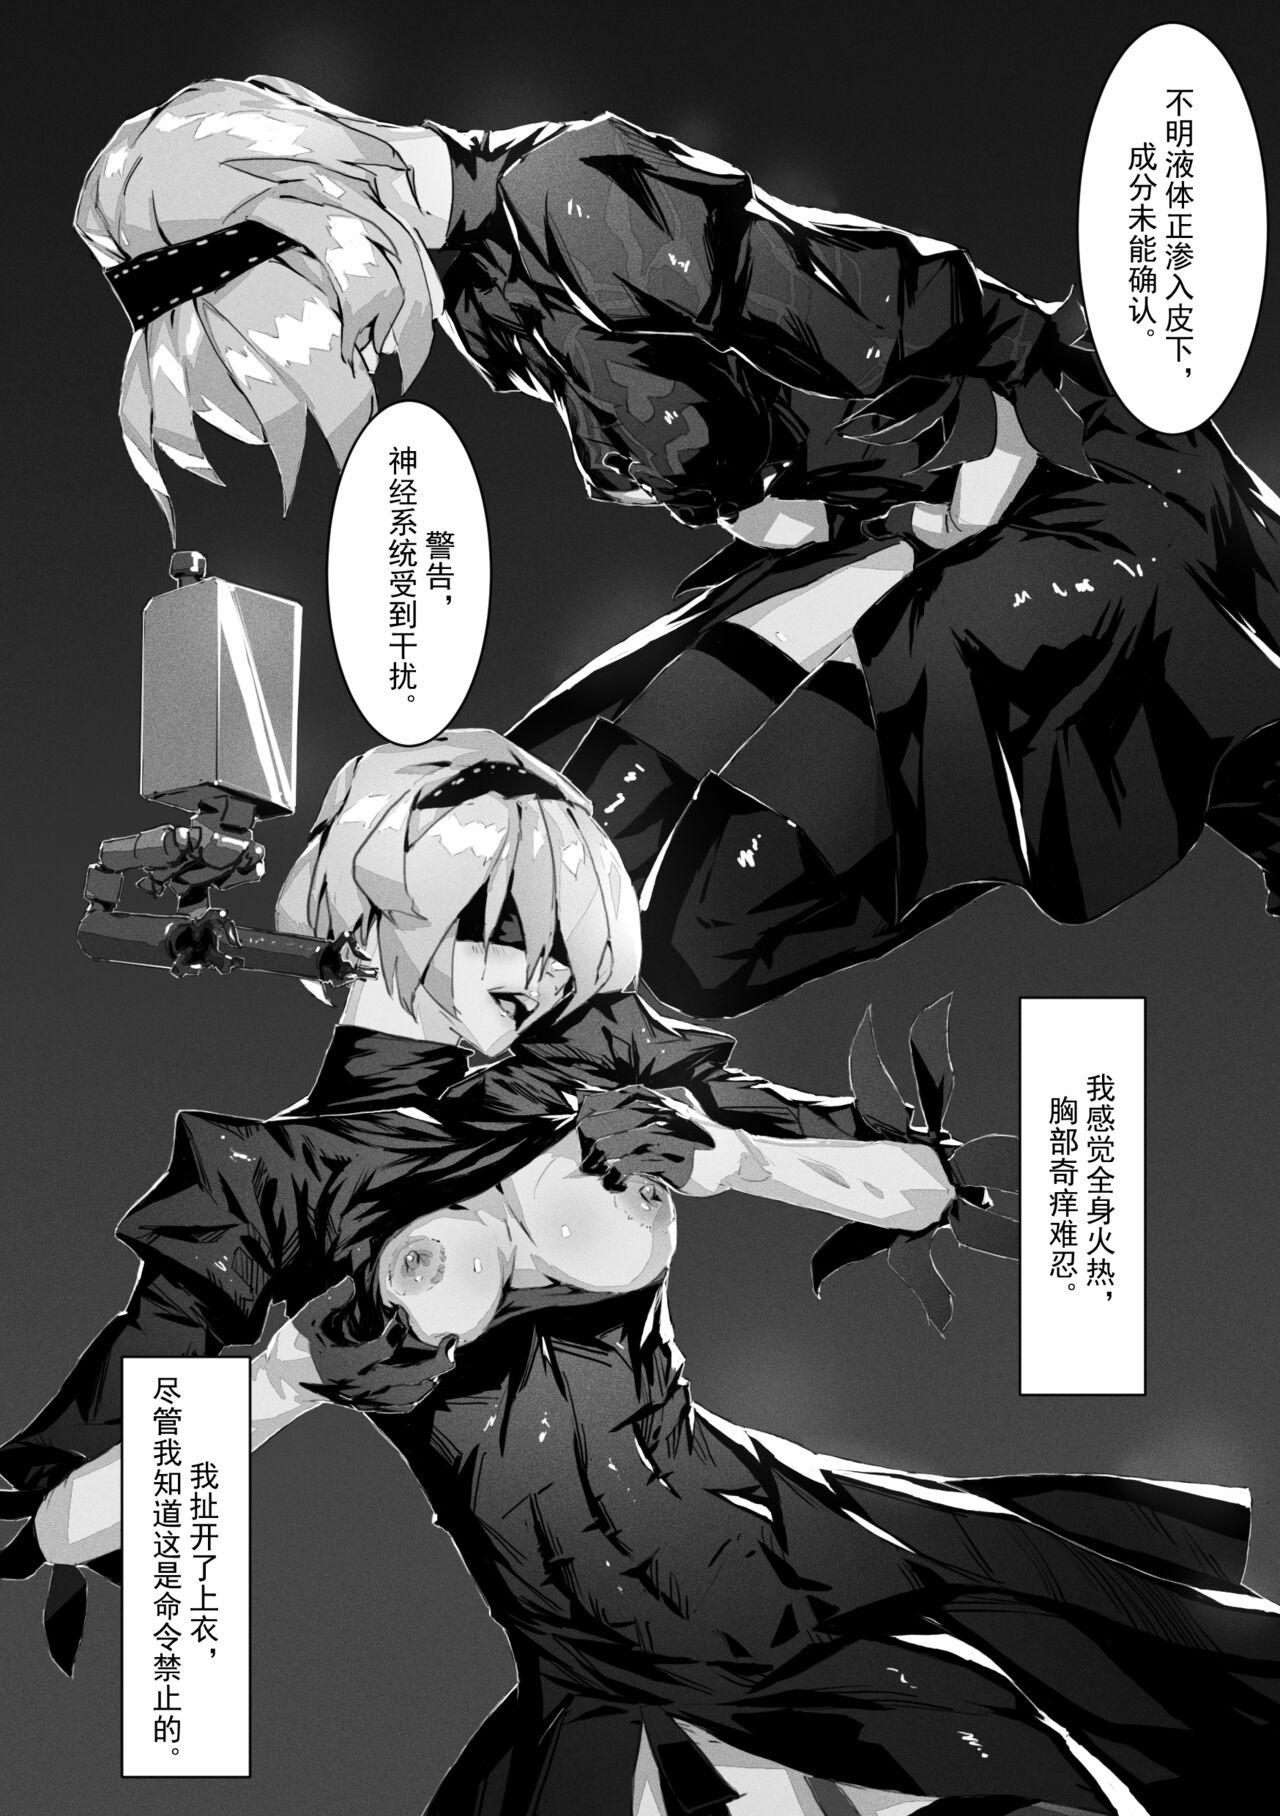  2B In Trouble Part 1-6 - Nier automata Real Amature Porn - Page 8